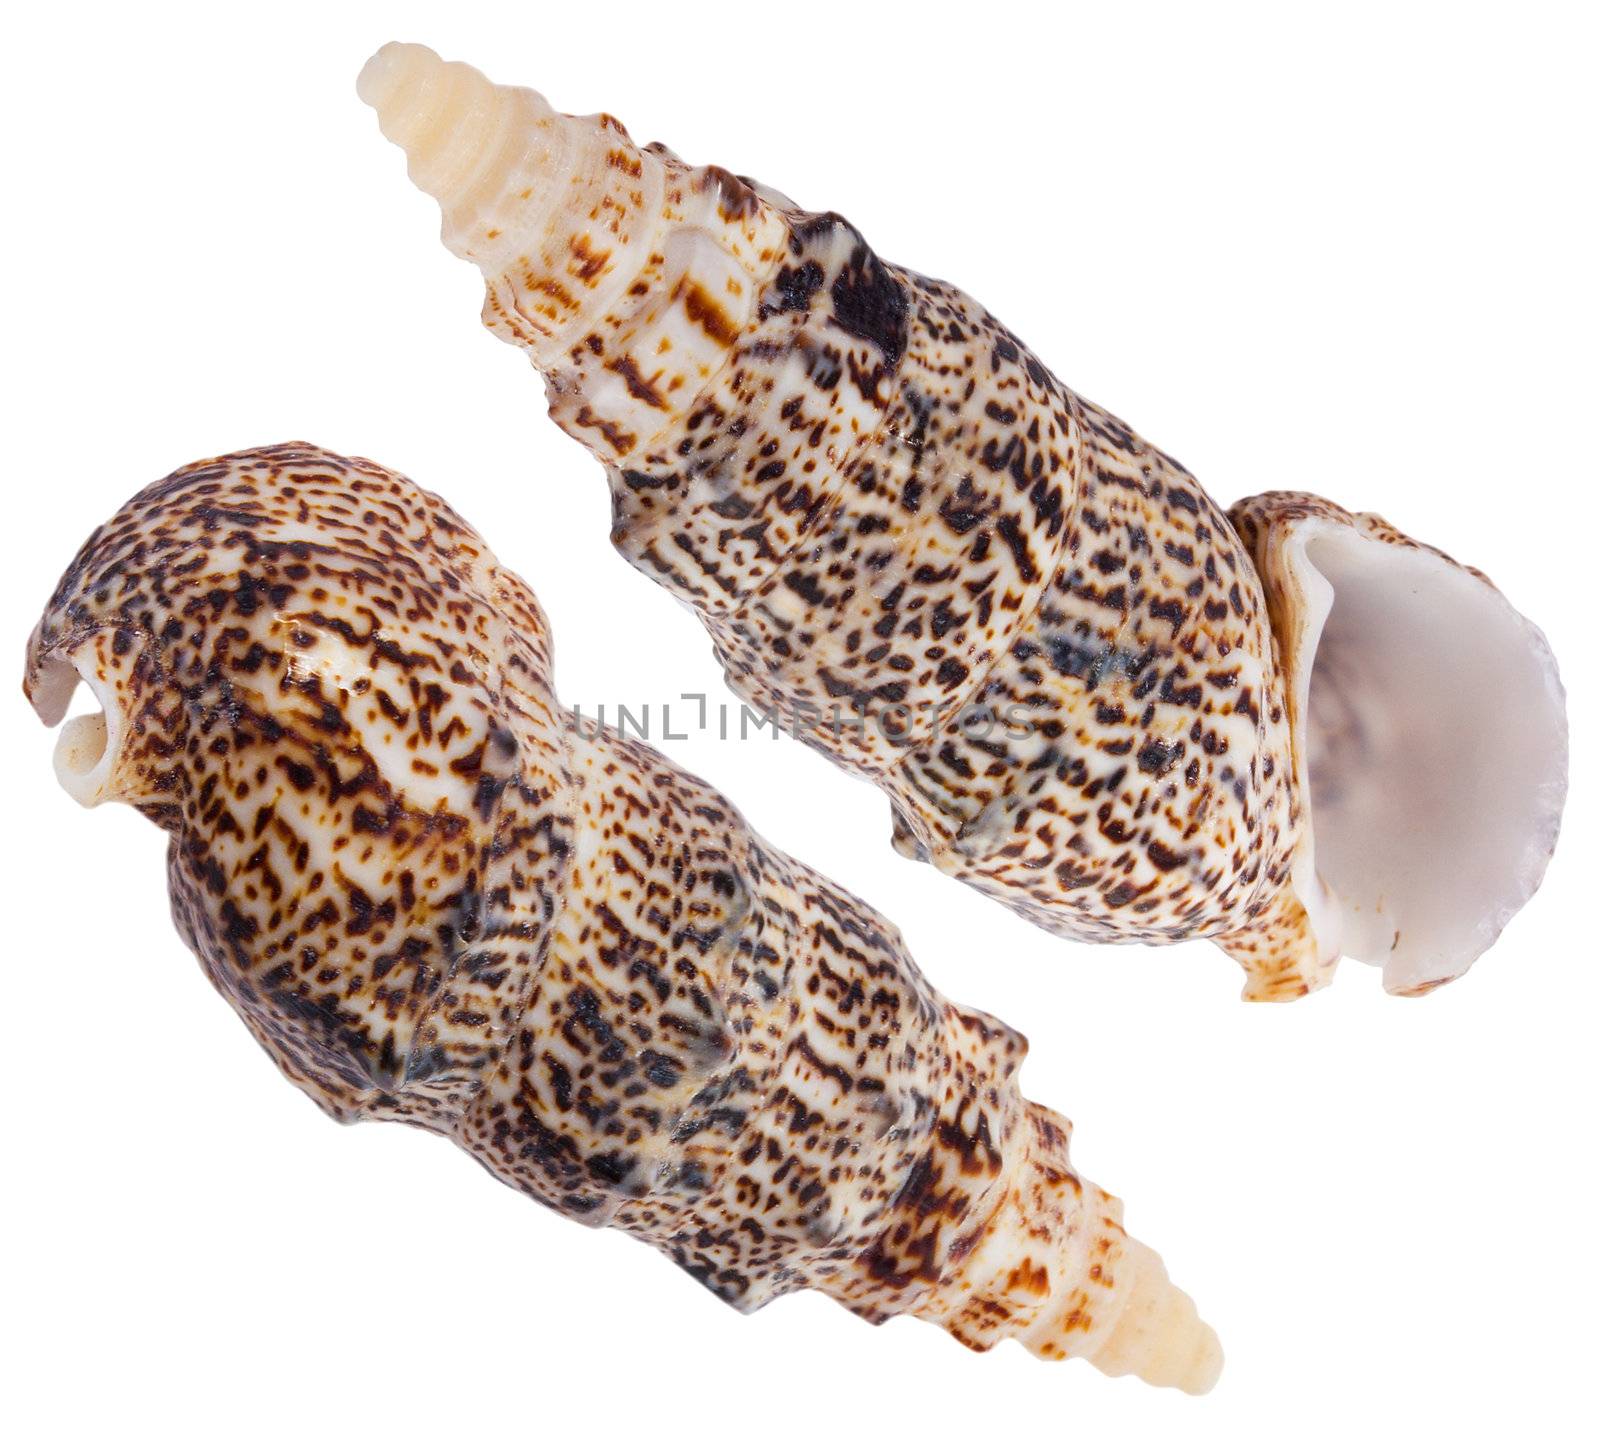 close-up two seashells, isolated on white